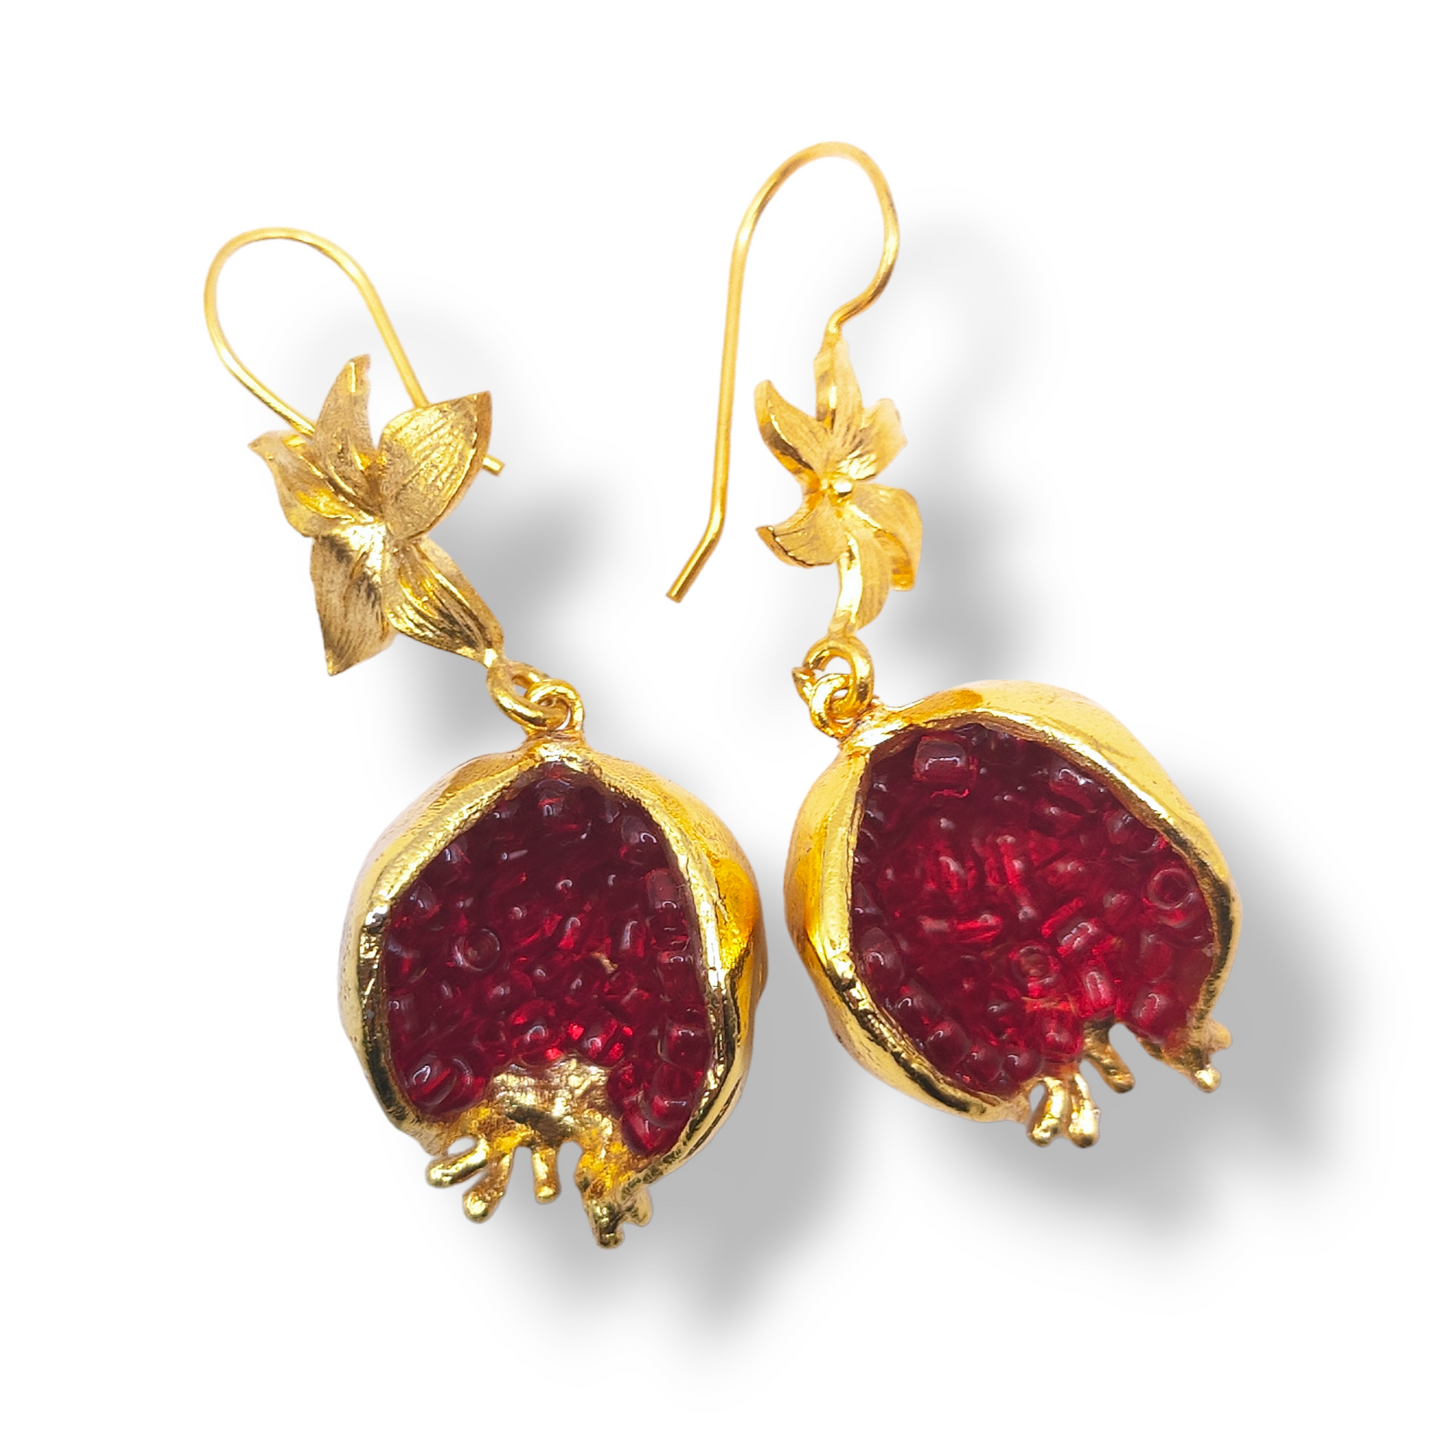 Contemporary Handmade Red Pomegranate Earrings | Gold-Plated with Red Ruby CZ Accents